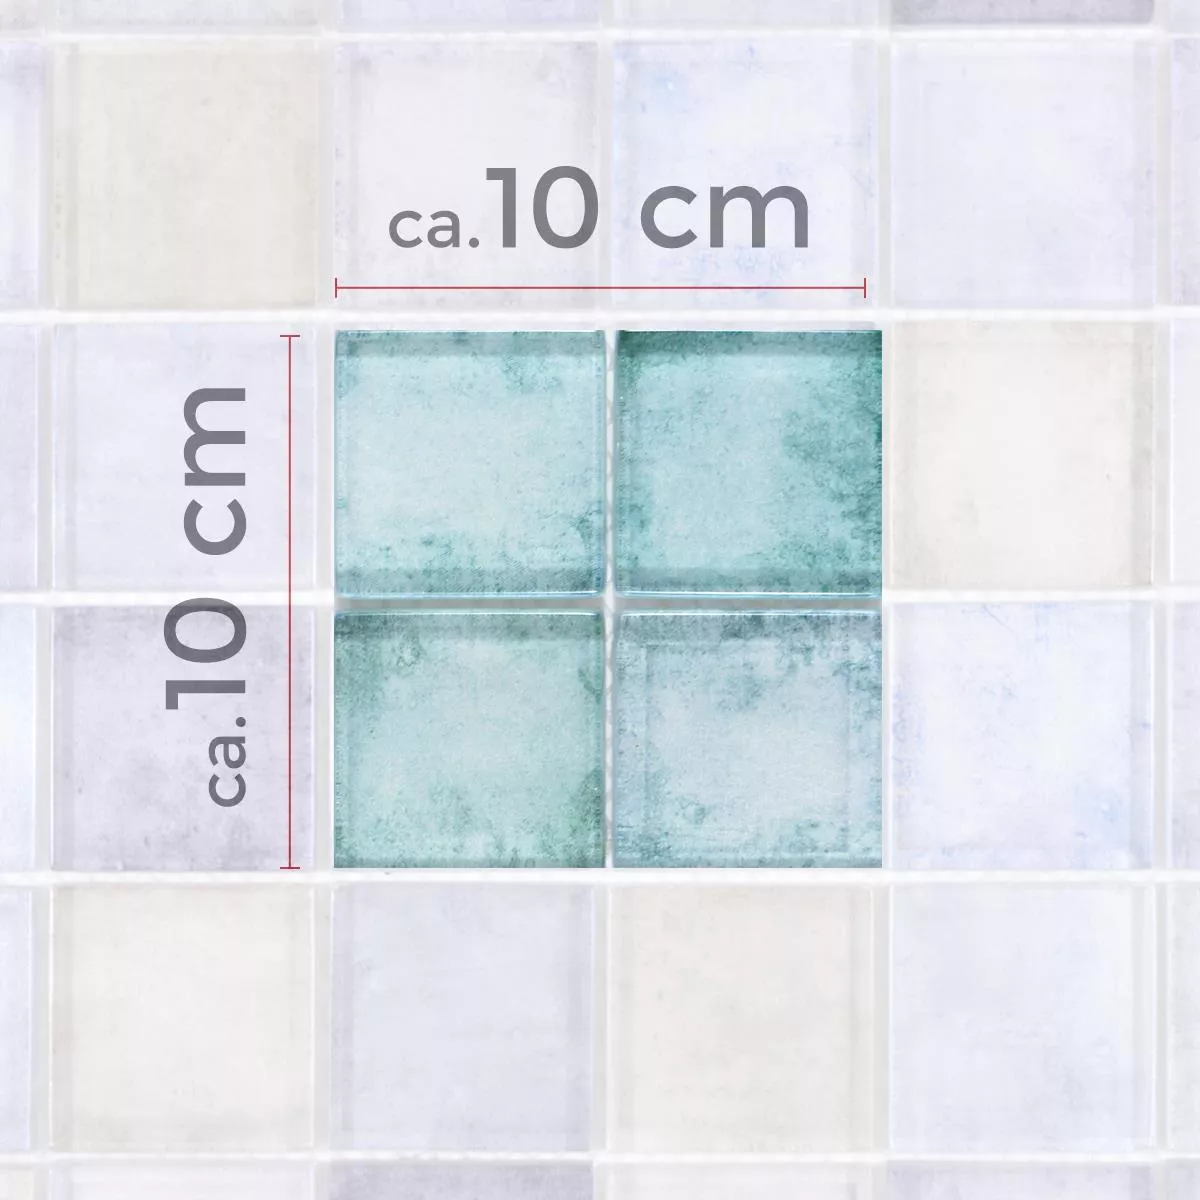 Sample Glass Mosaic Tiles Clementine Green